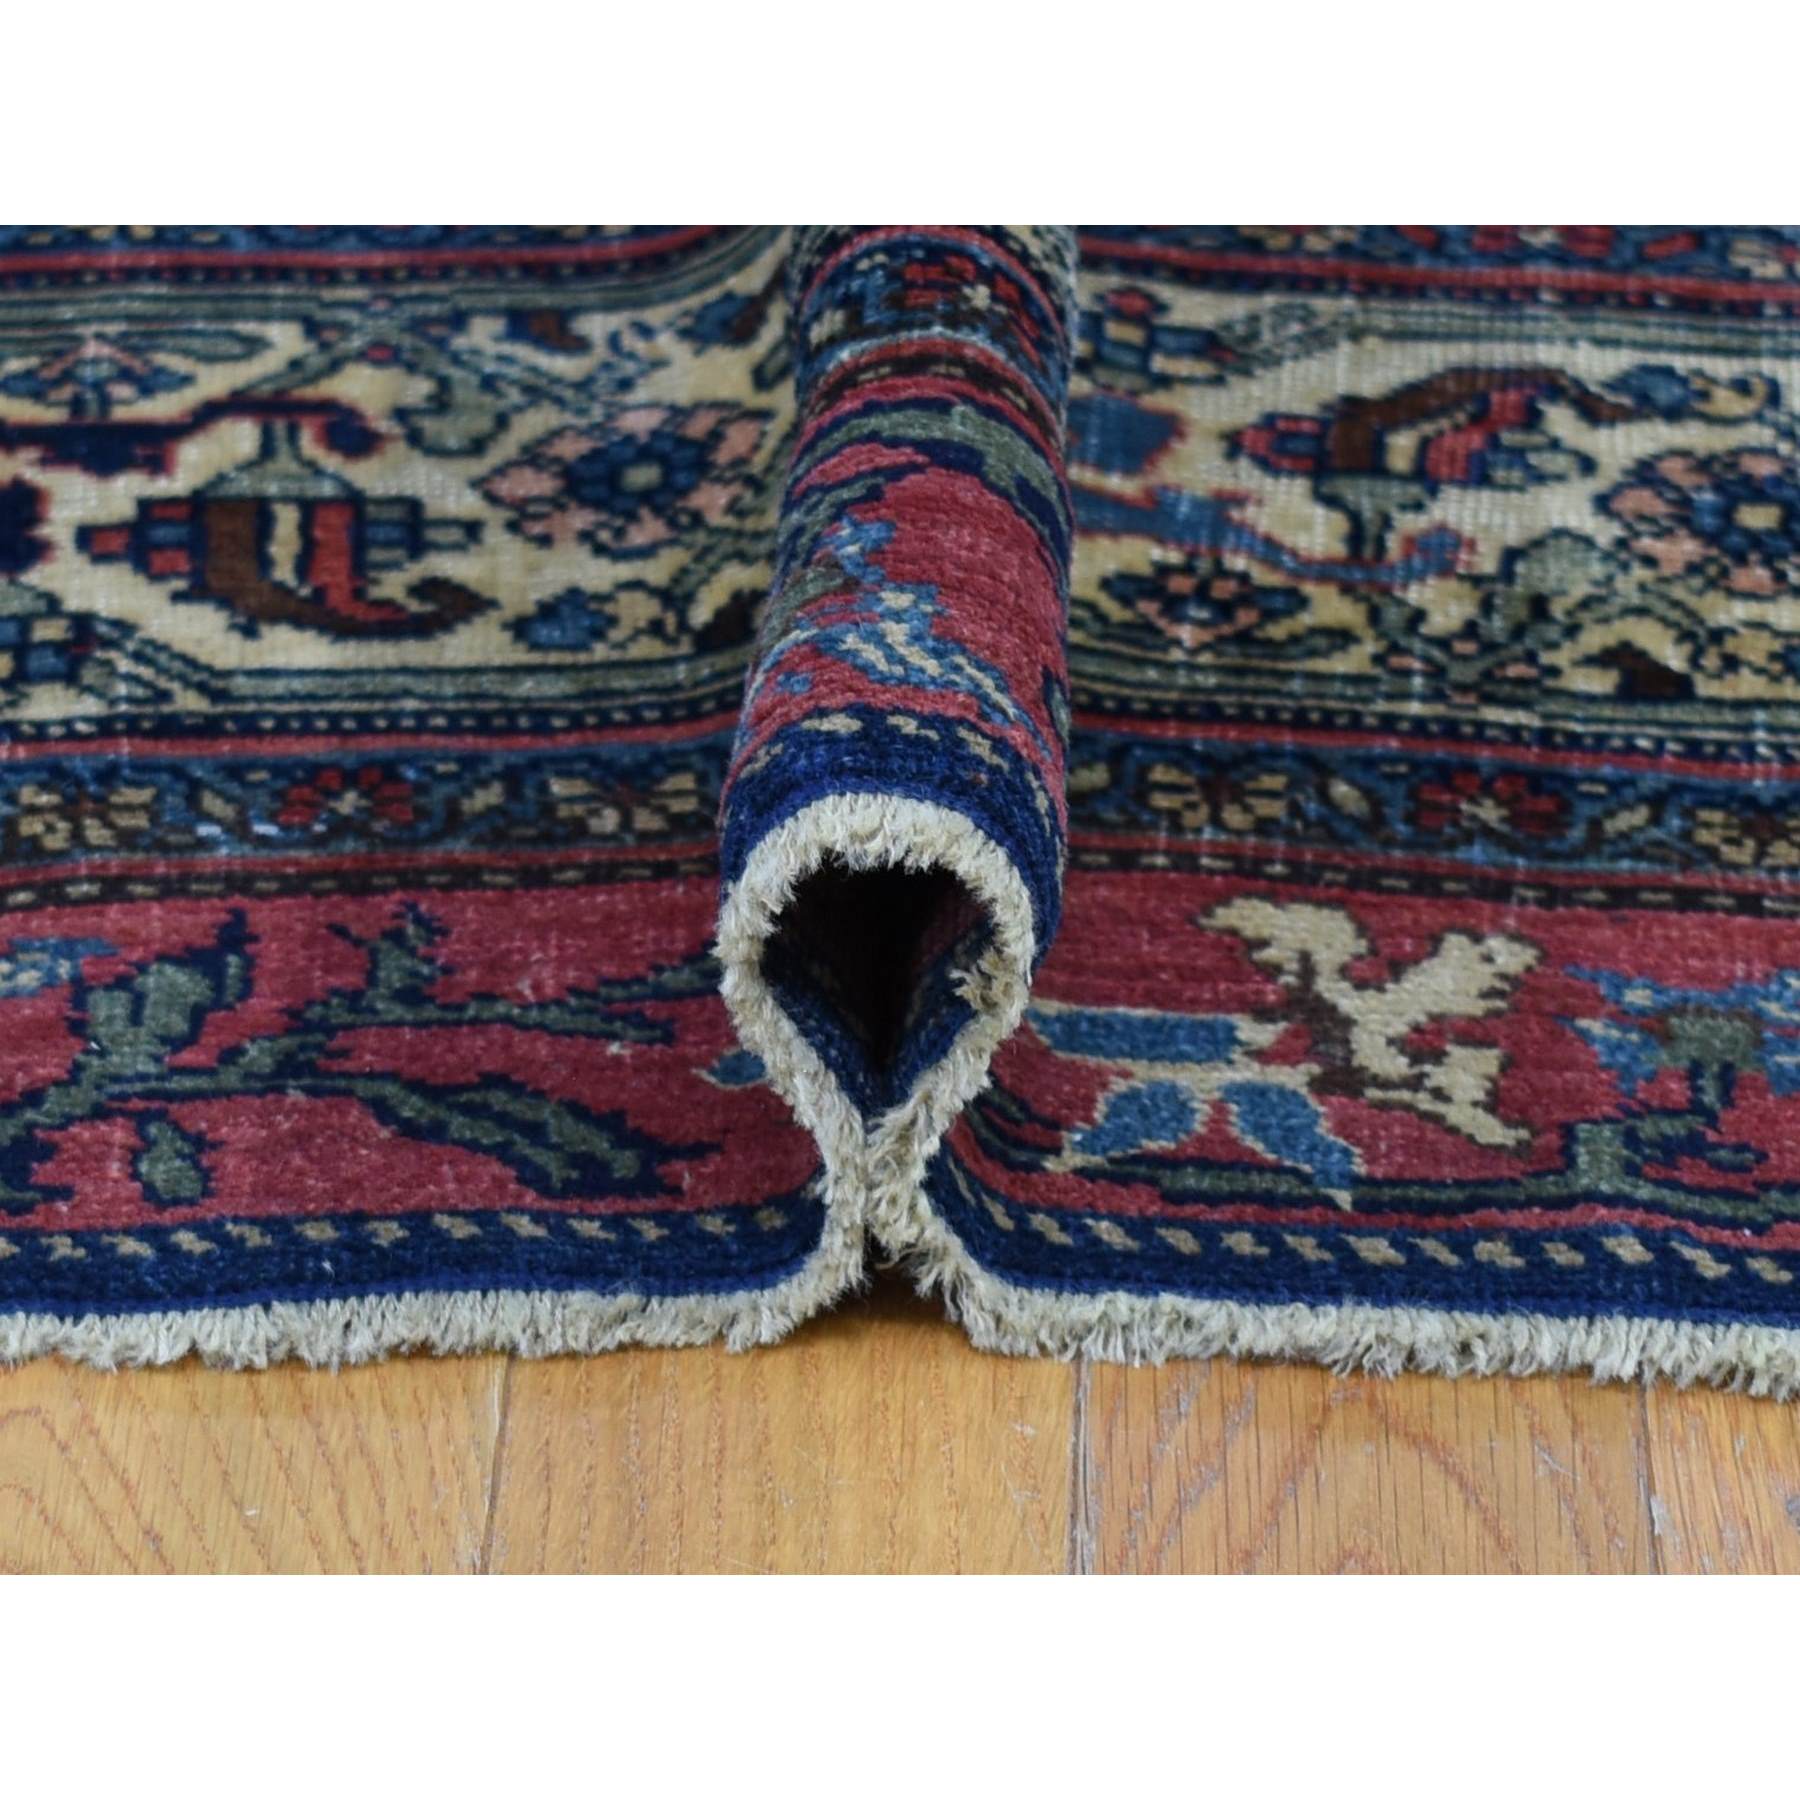 Antique-Hand-Knotted-Rug-400585